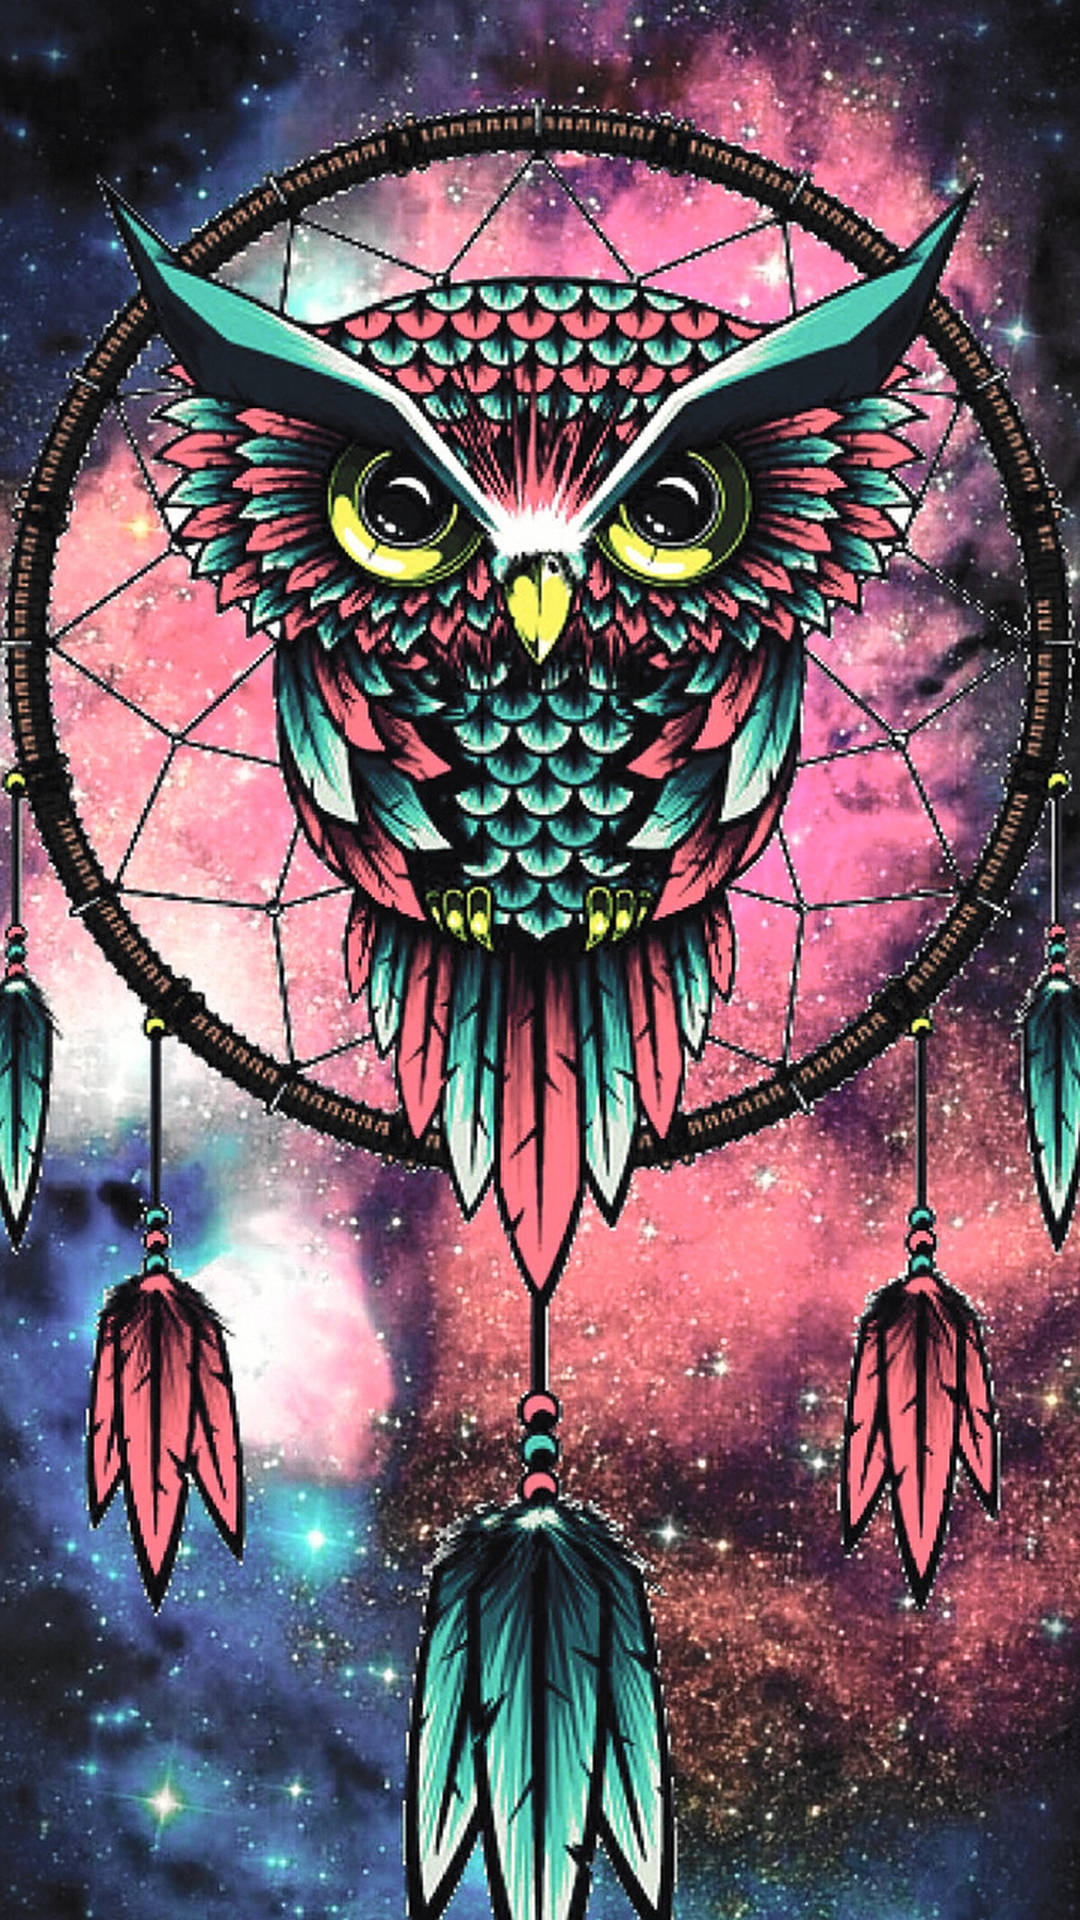 500 Dreamcatcher Pictures HD  Download Free Images on Unsplash